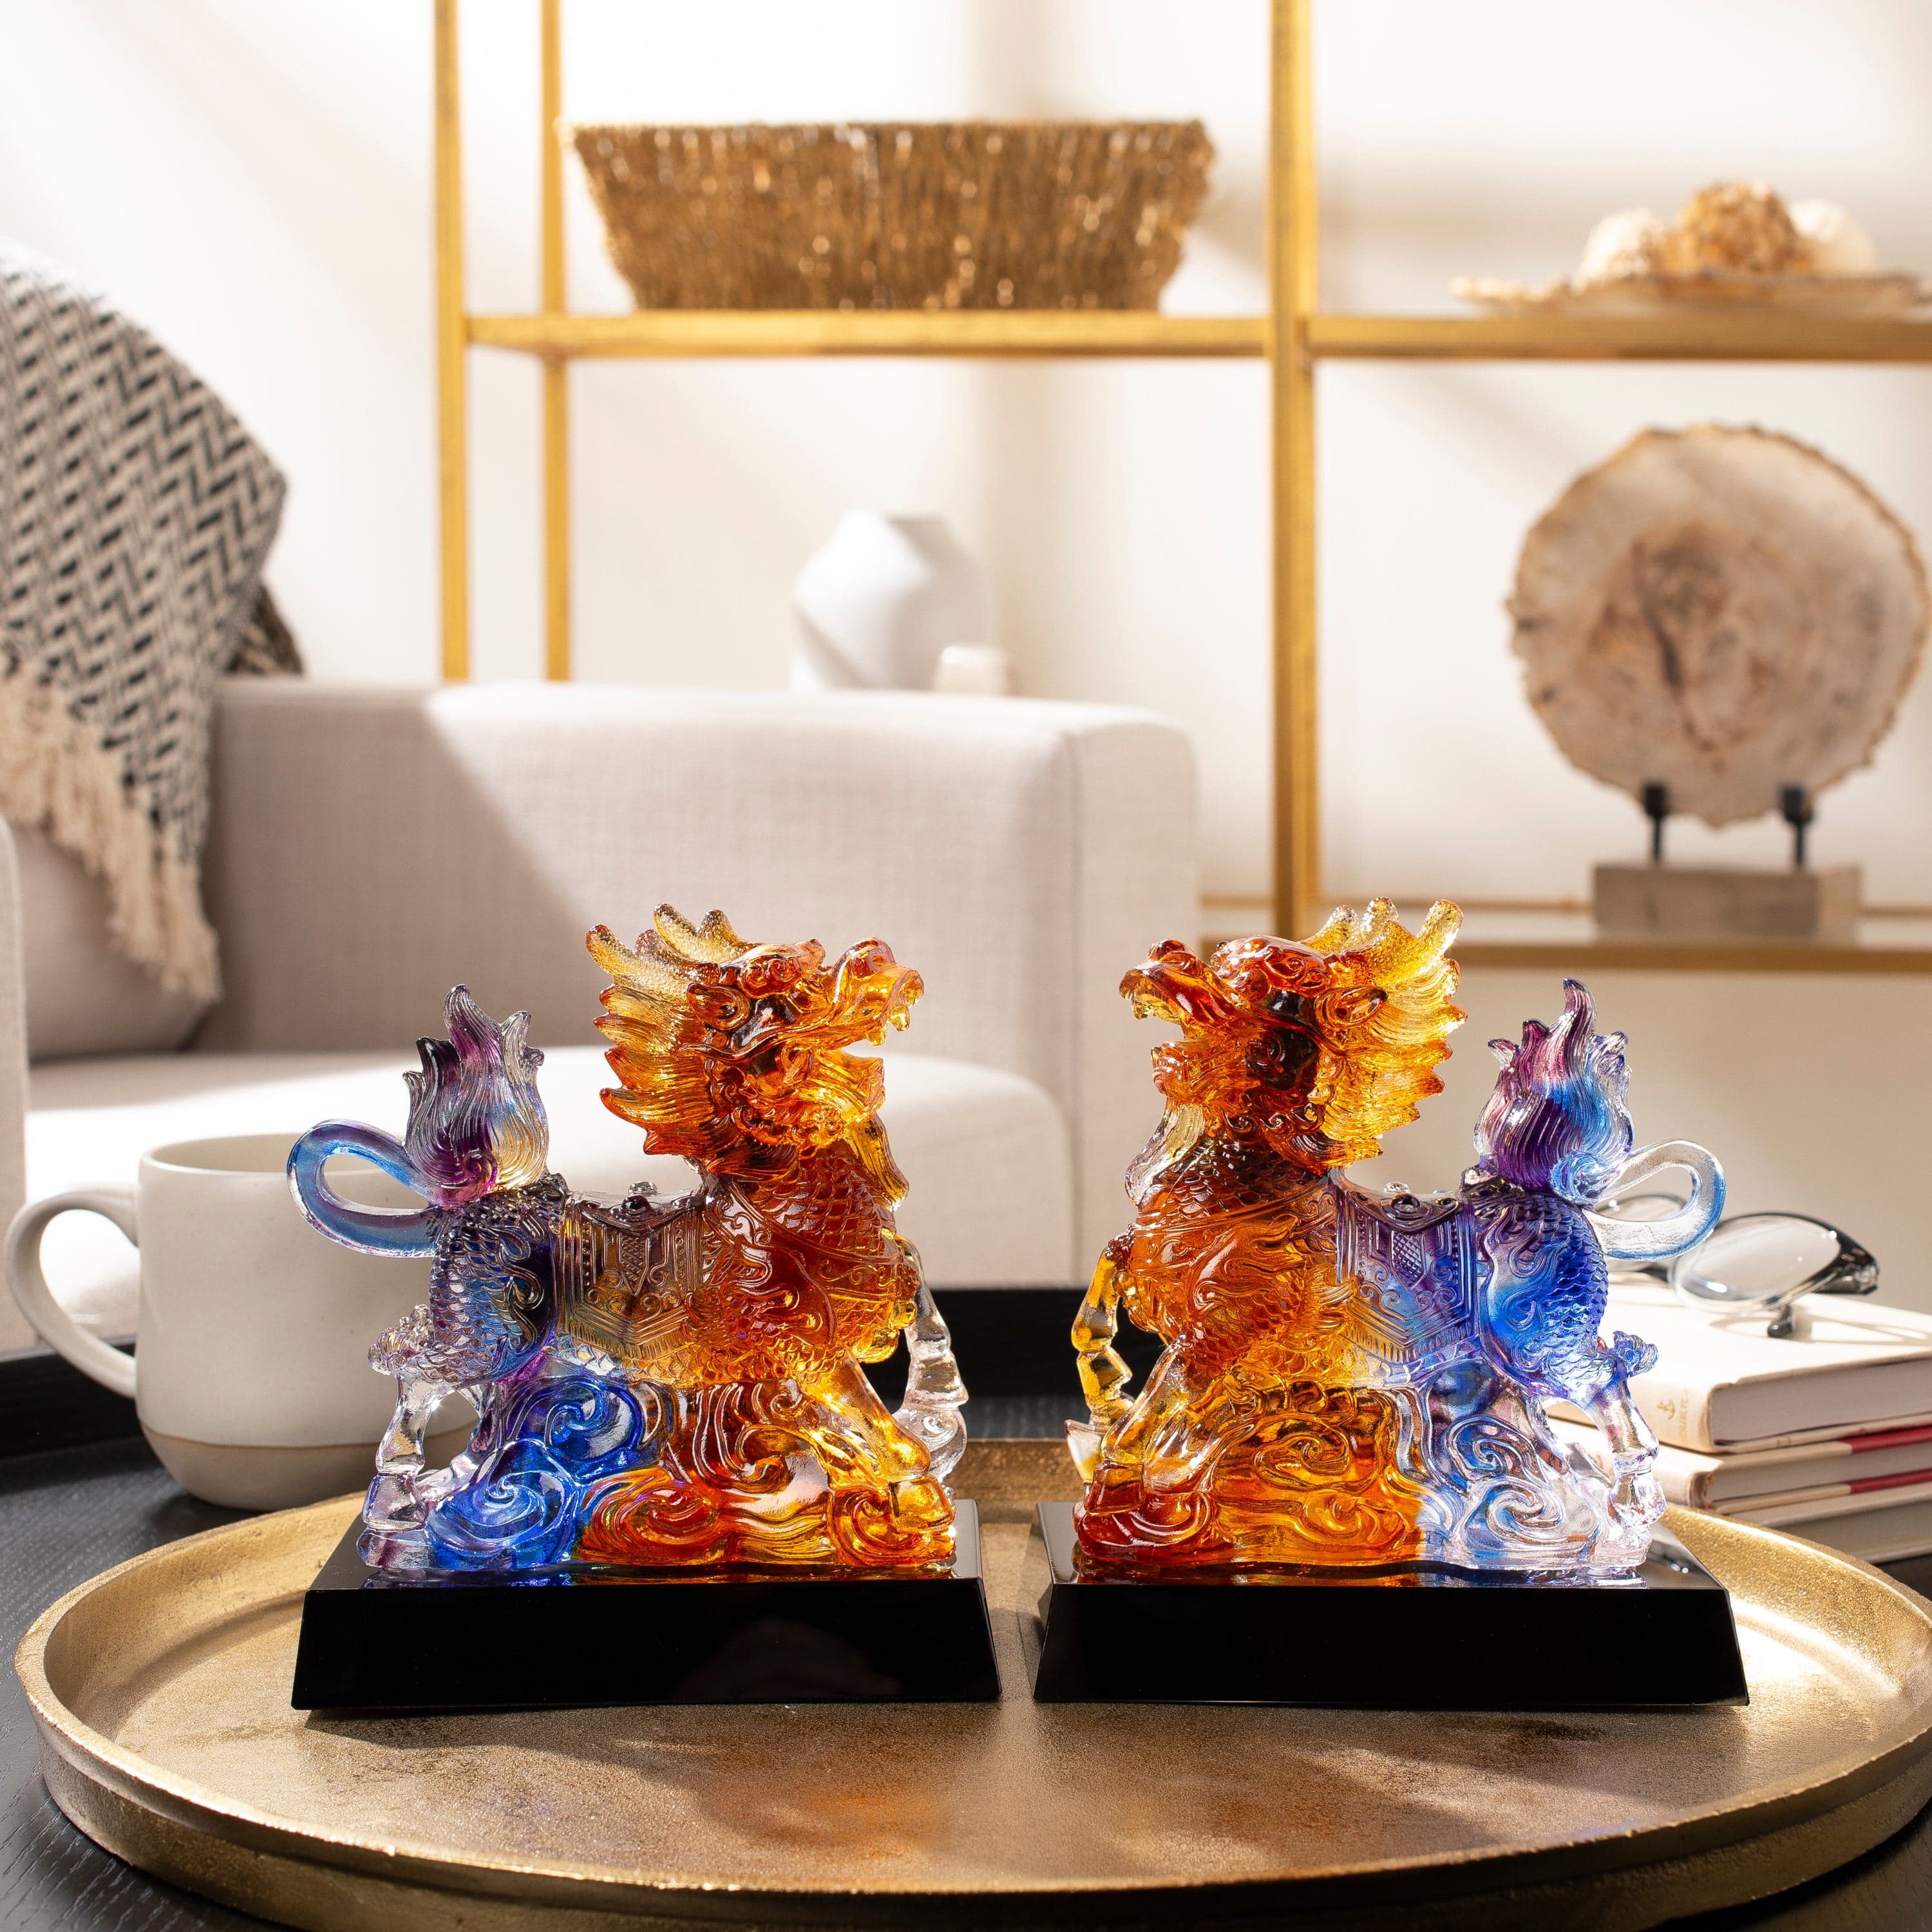 Kalifano Crystal Carving Elegant Qilin Crystal Carving Pair with Detachable Base - A Symbol of Good Luck and Prosperity CR700-KYL